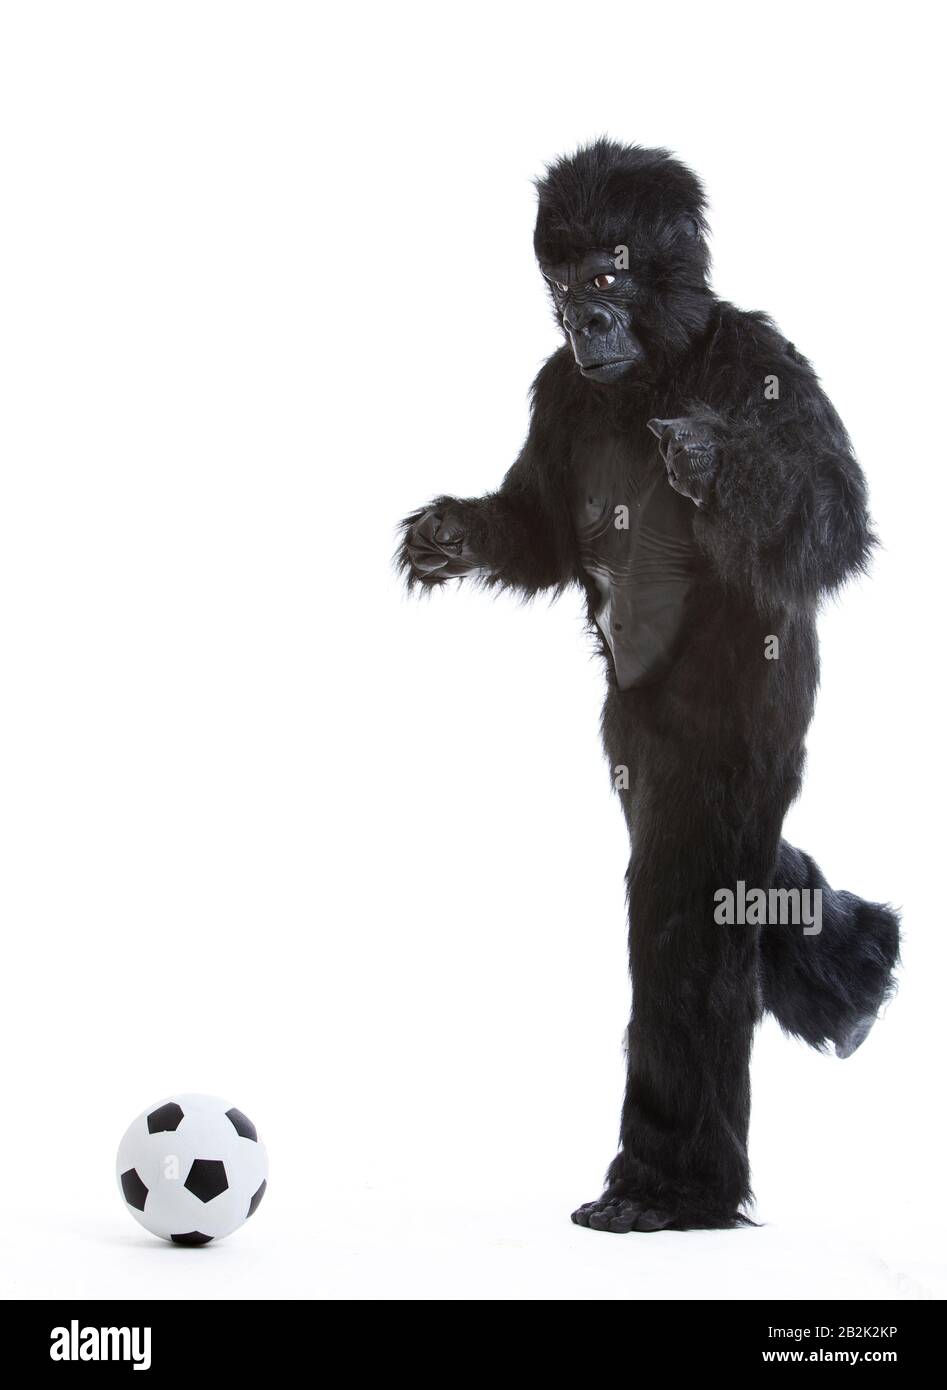 Young man in gorilla costume kicking soccer ball against white background Stock Photo